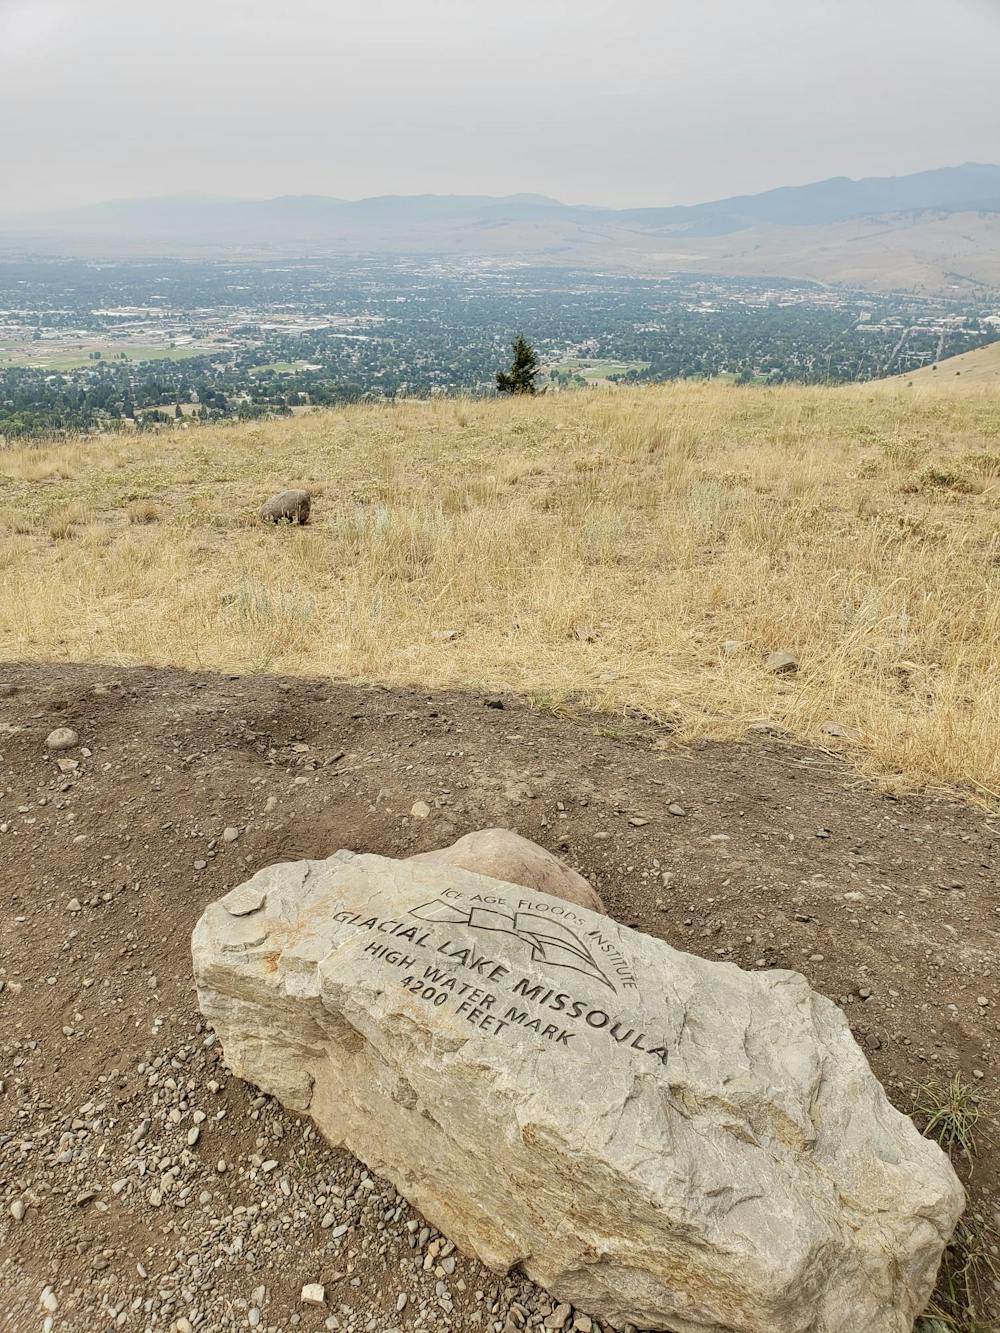 Missoula from the viewpoint